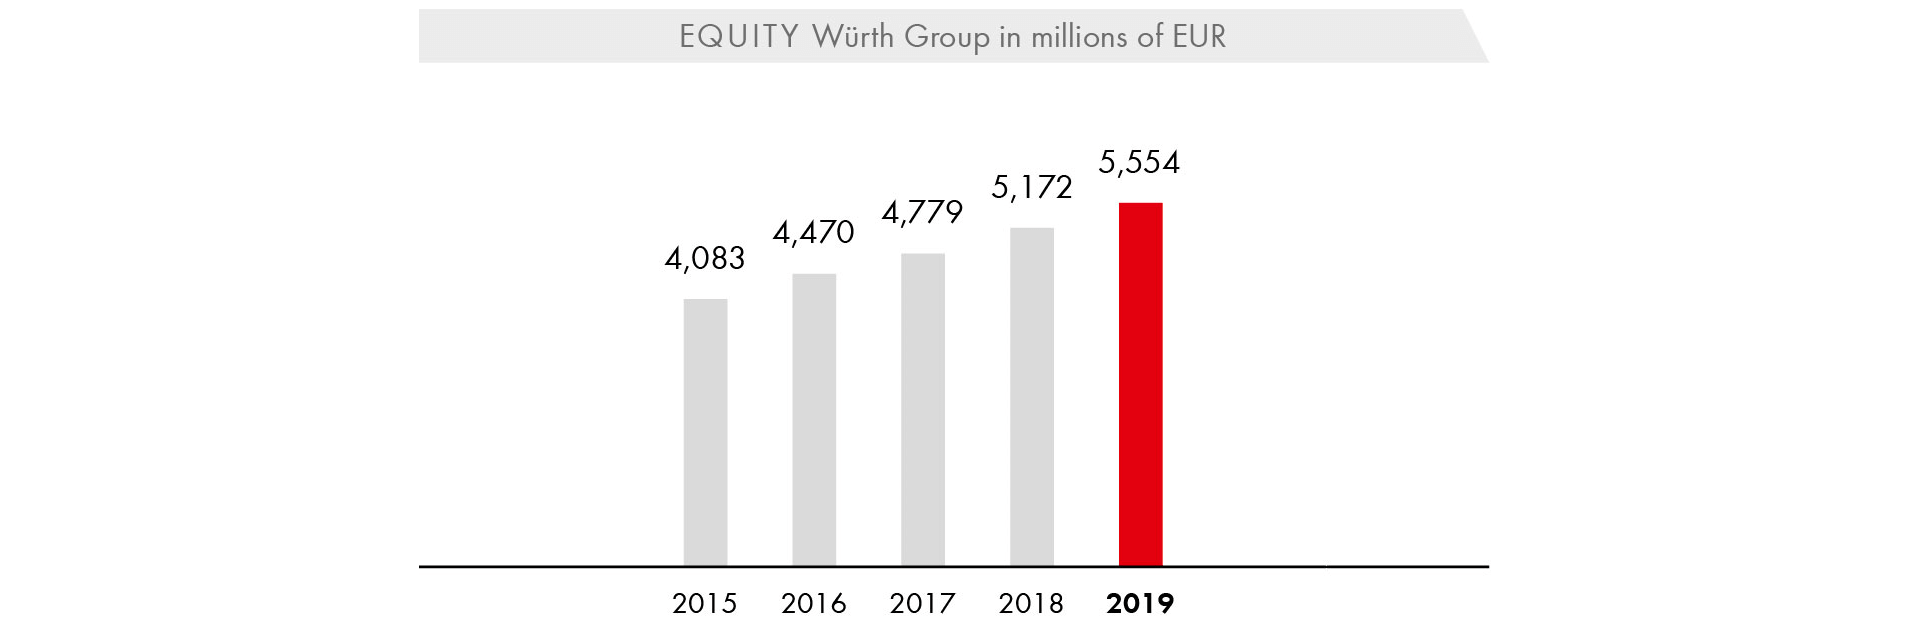 Equity Würth Group in millions of EUR